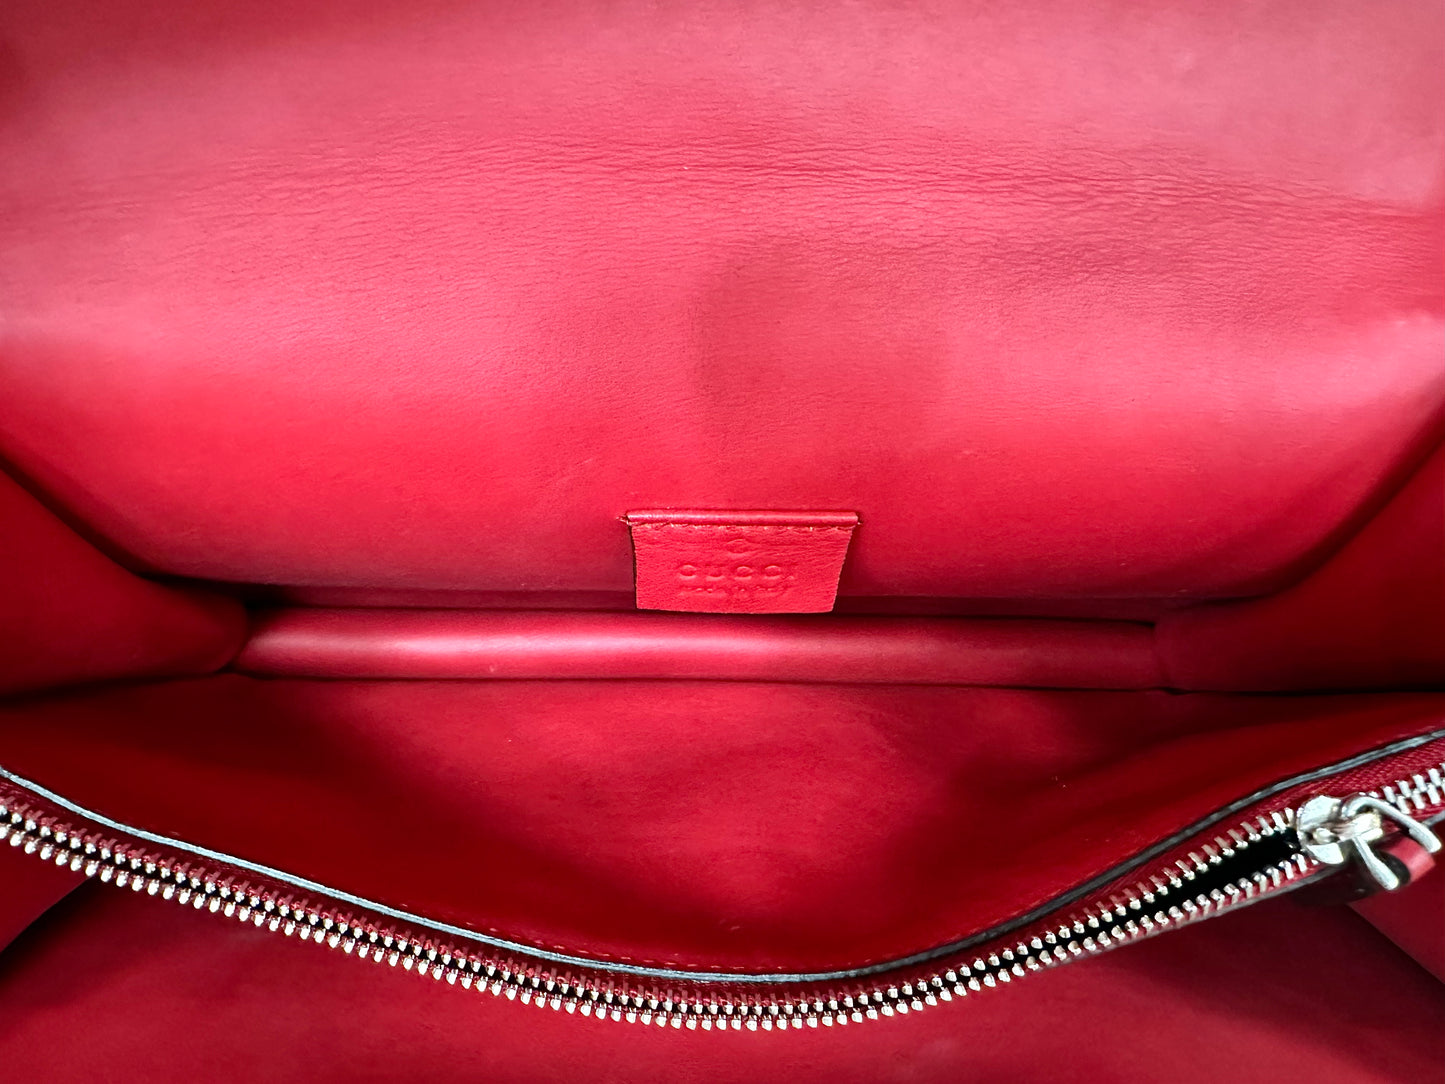 Close up of 1 of the compartments inside red leather